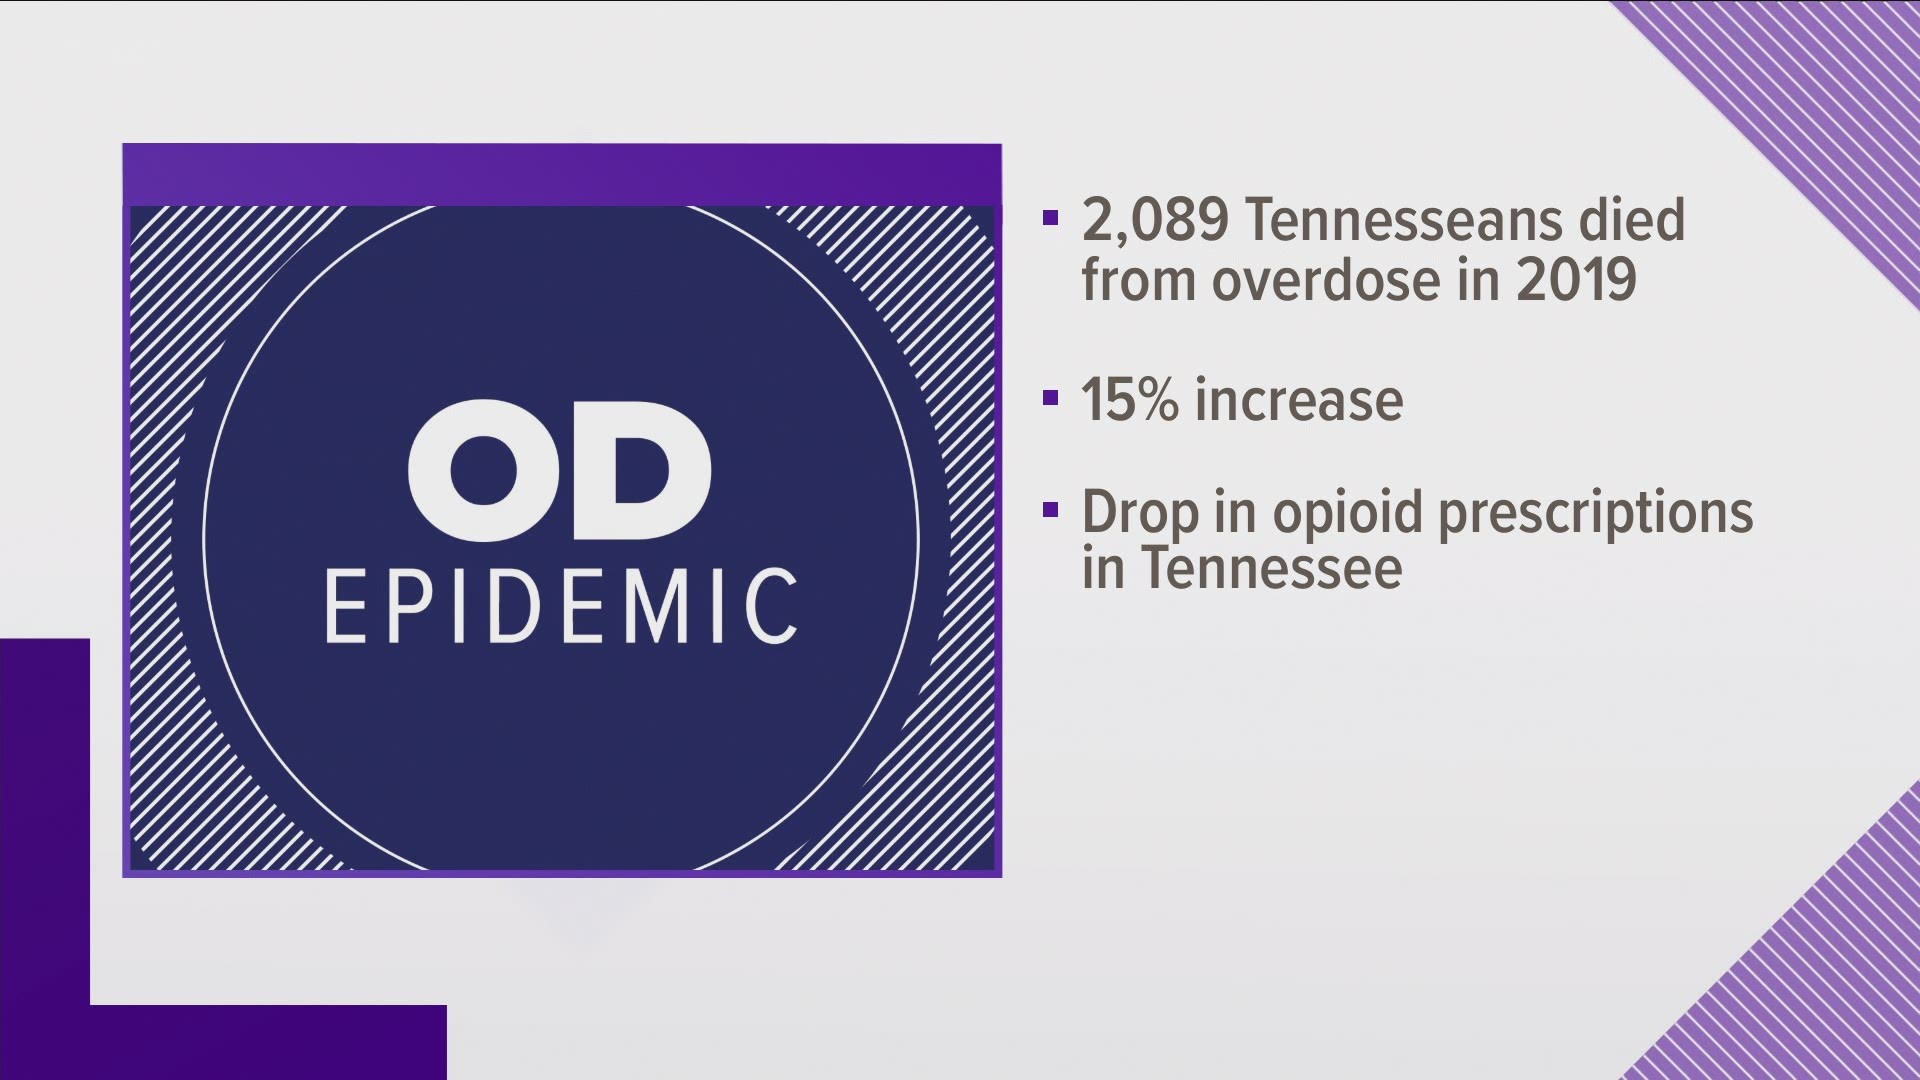 Officials said that 2020 could be the deadliest year for overdose-related deaths in Tennessee.